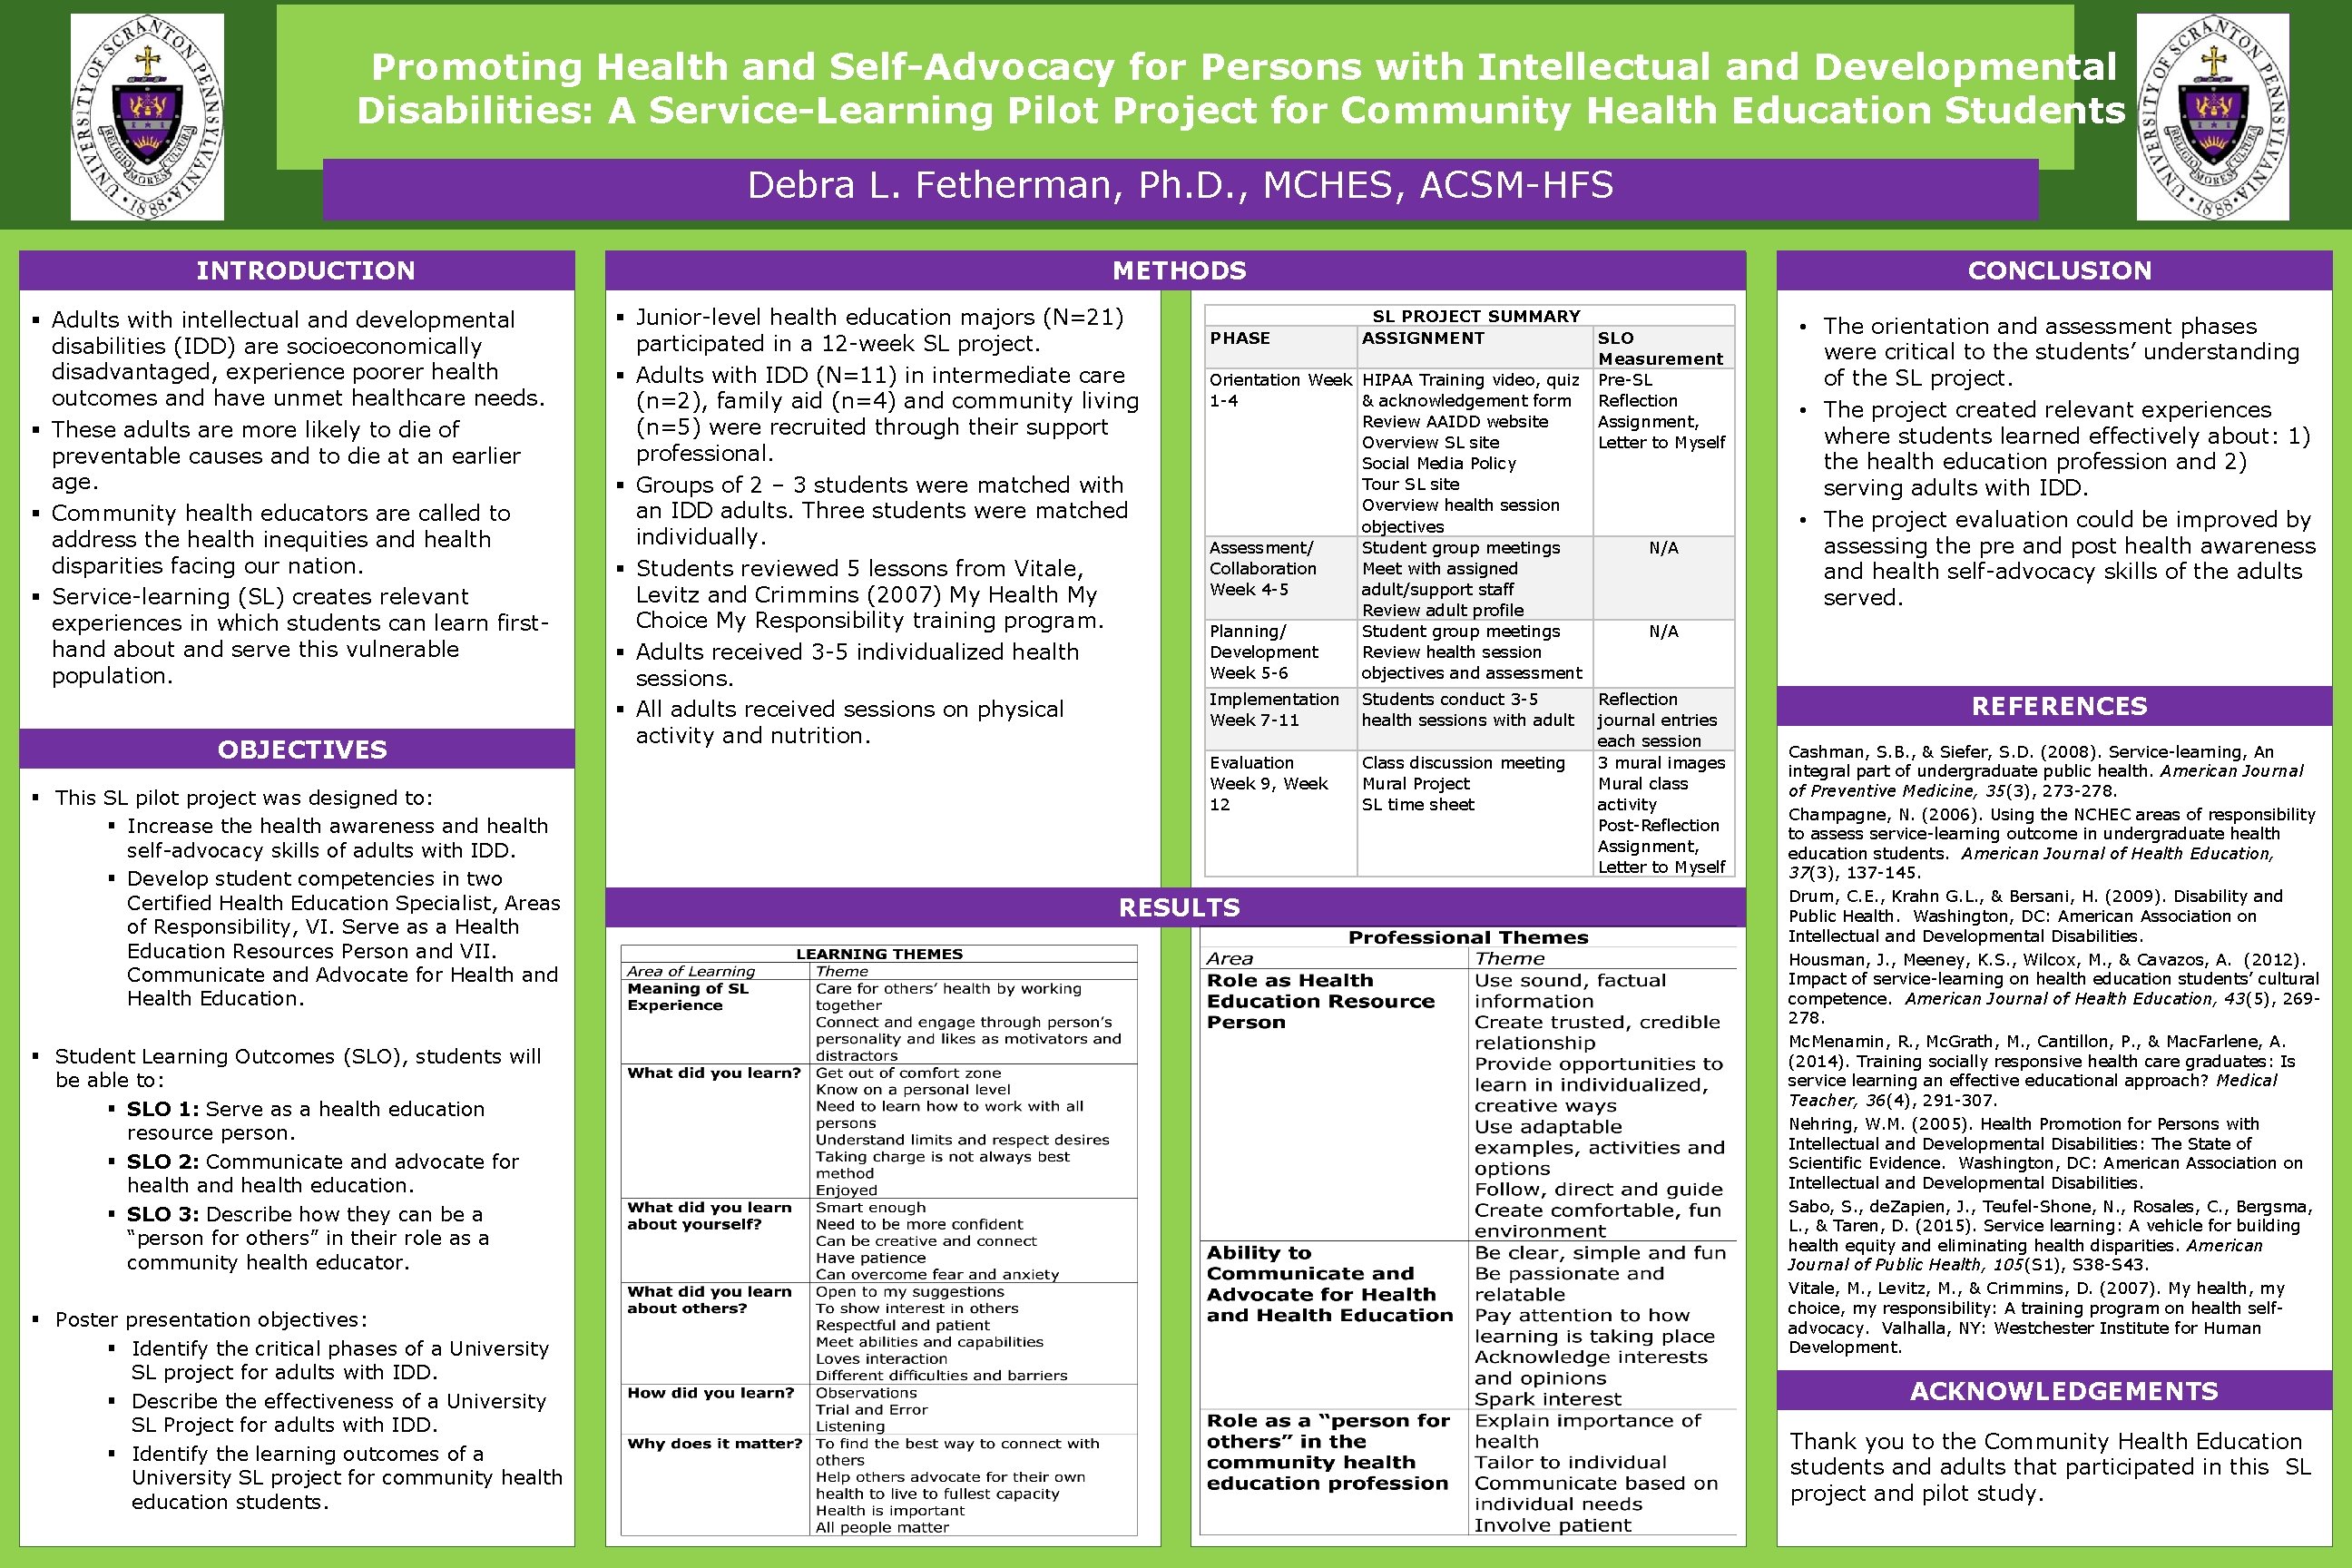 Promoting Health and Self-Advocacy for Persons with Intellectual and Developmental Disabilities: A Service-Learning Pilot